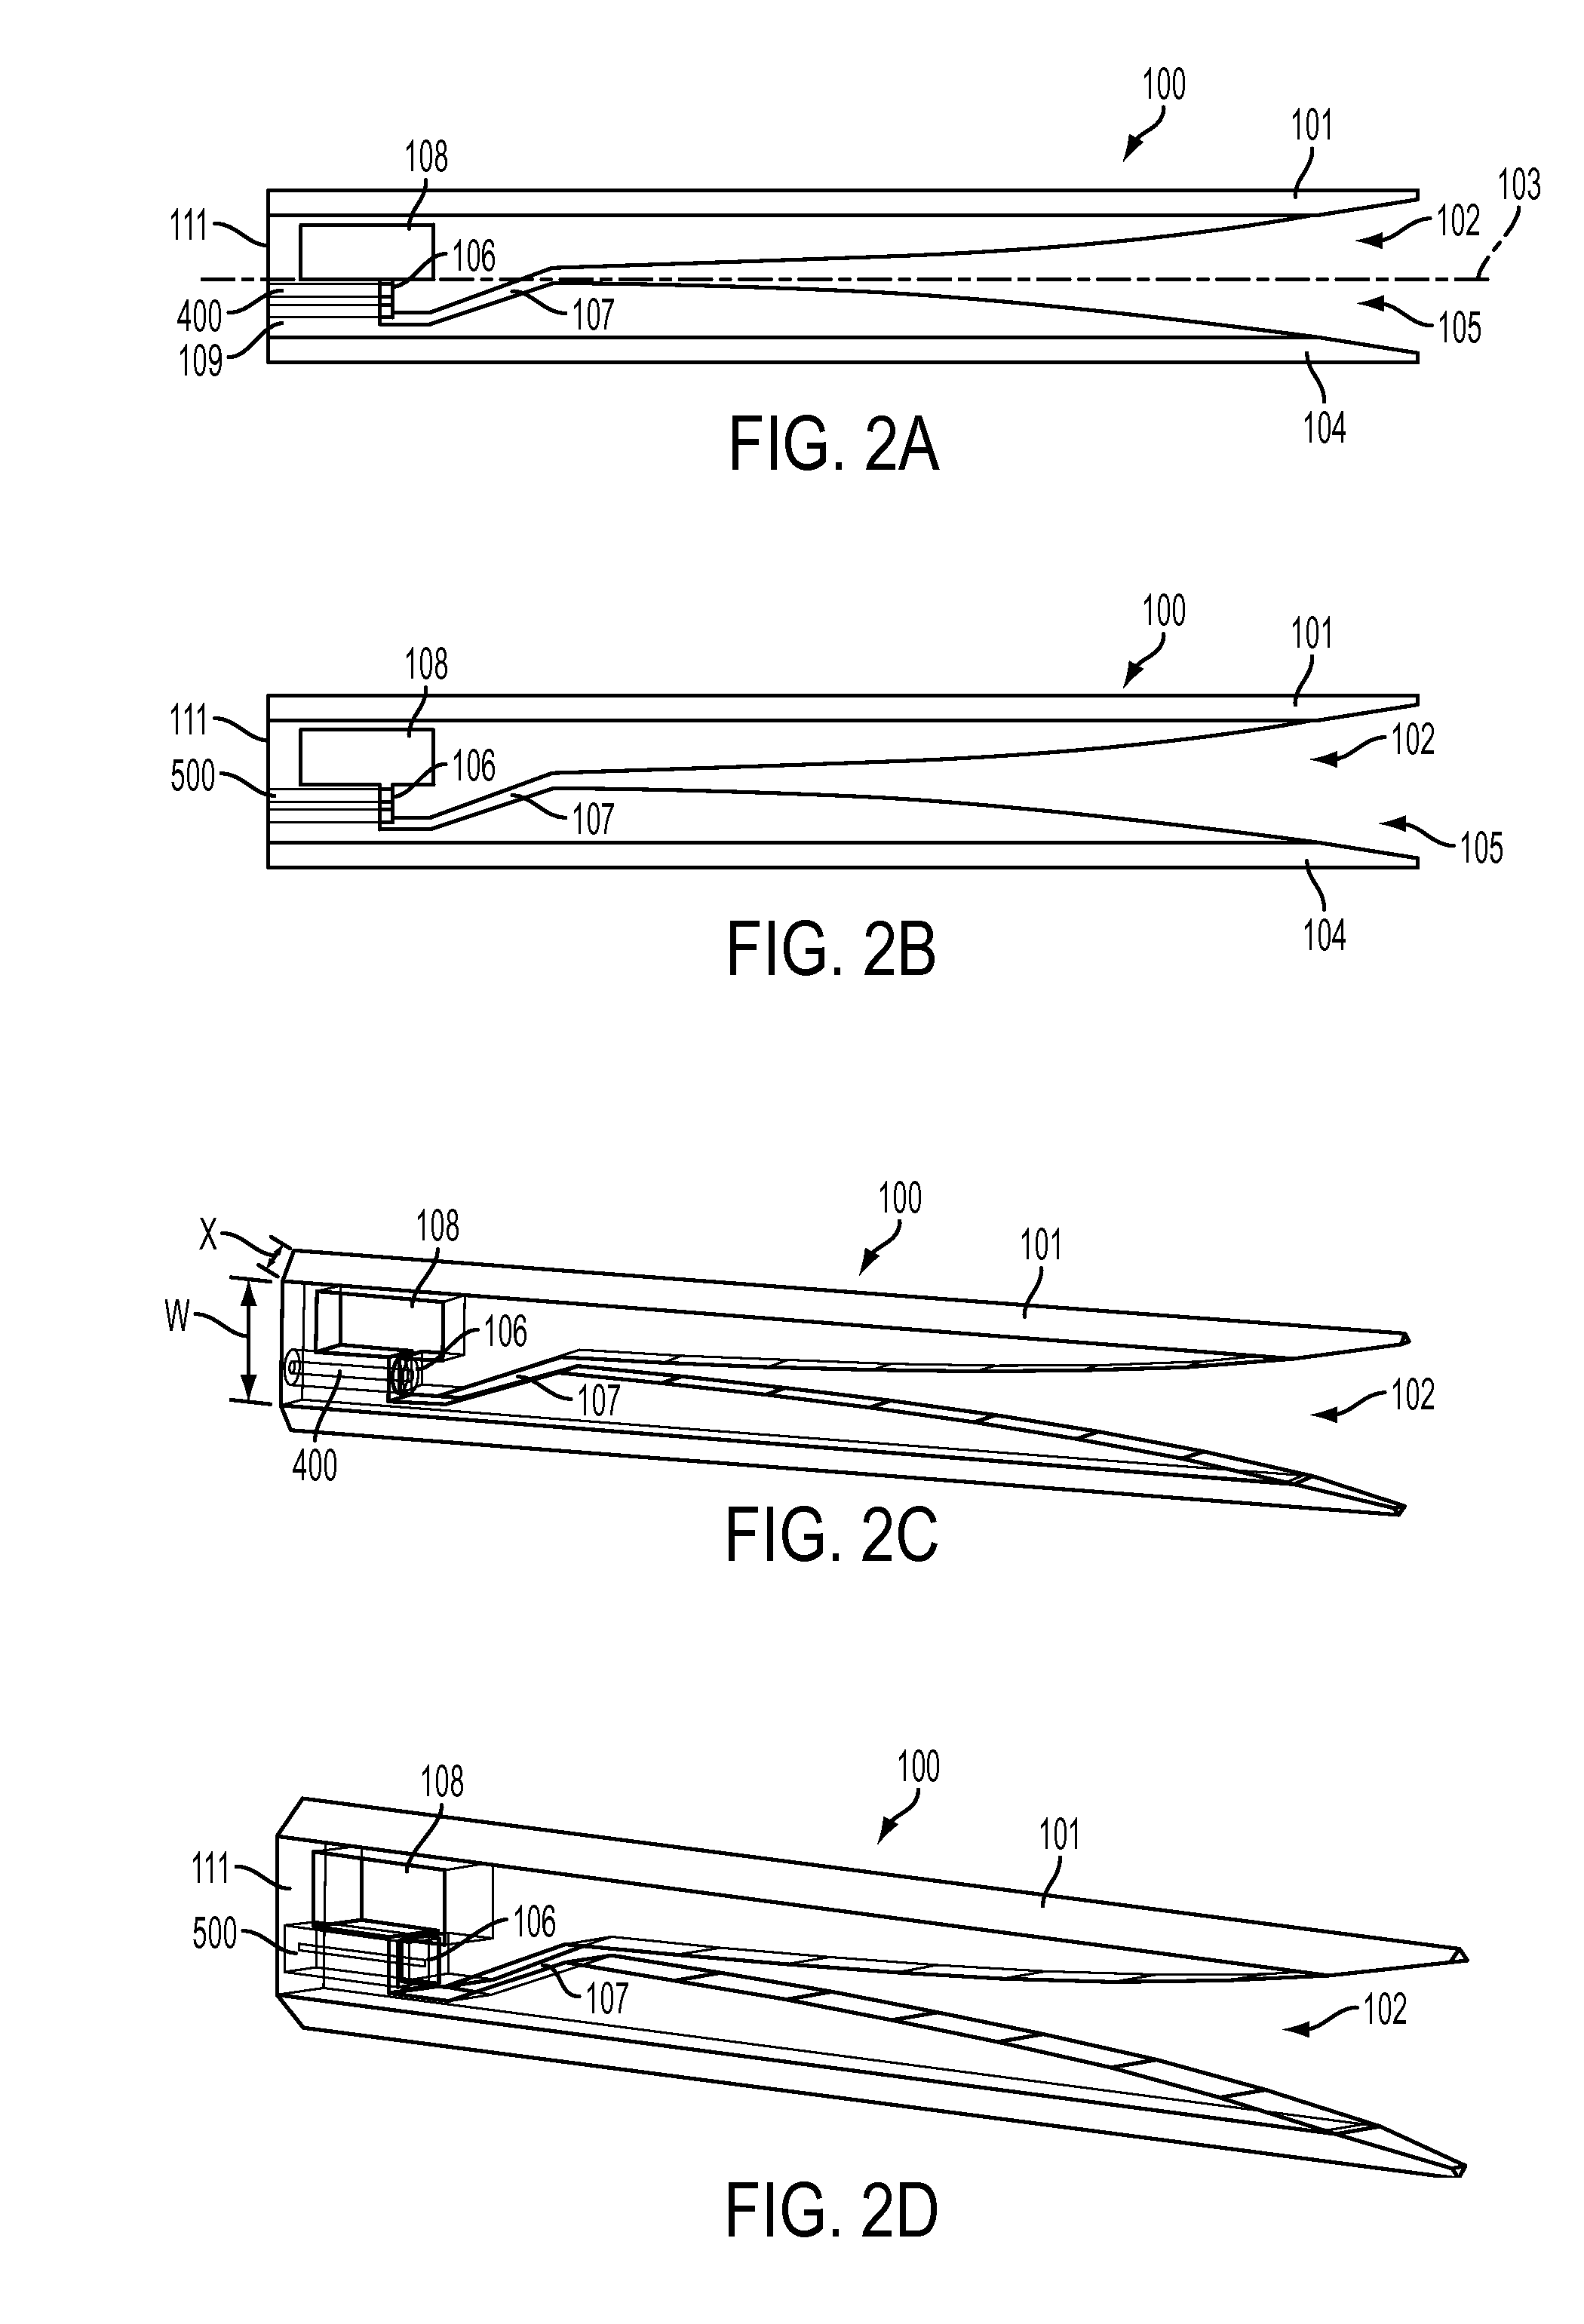 Ultra-wideband antenna element and array